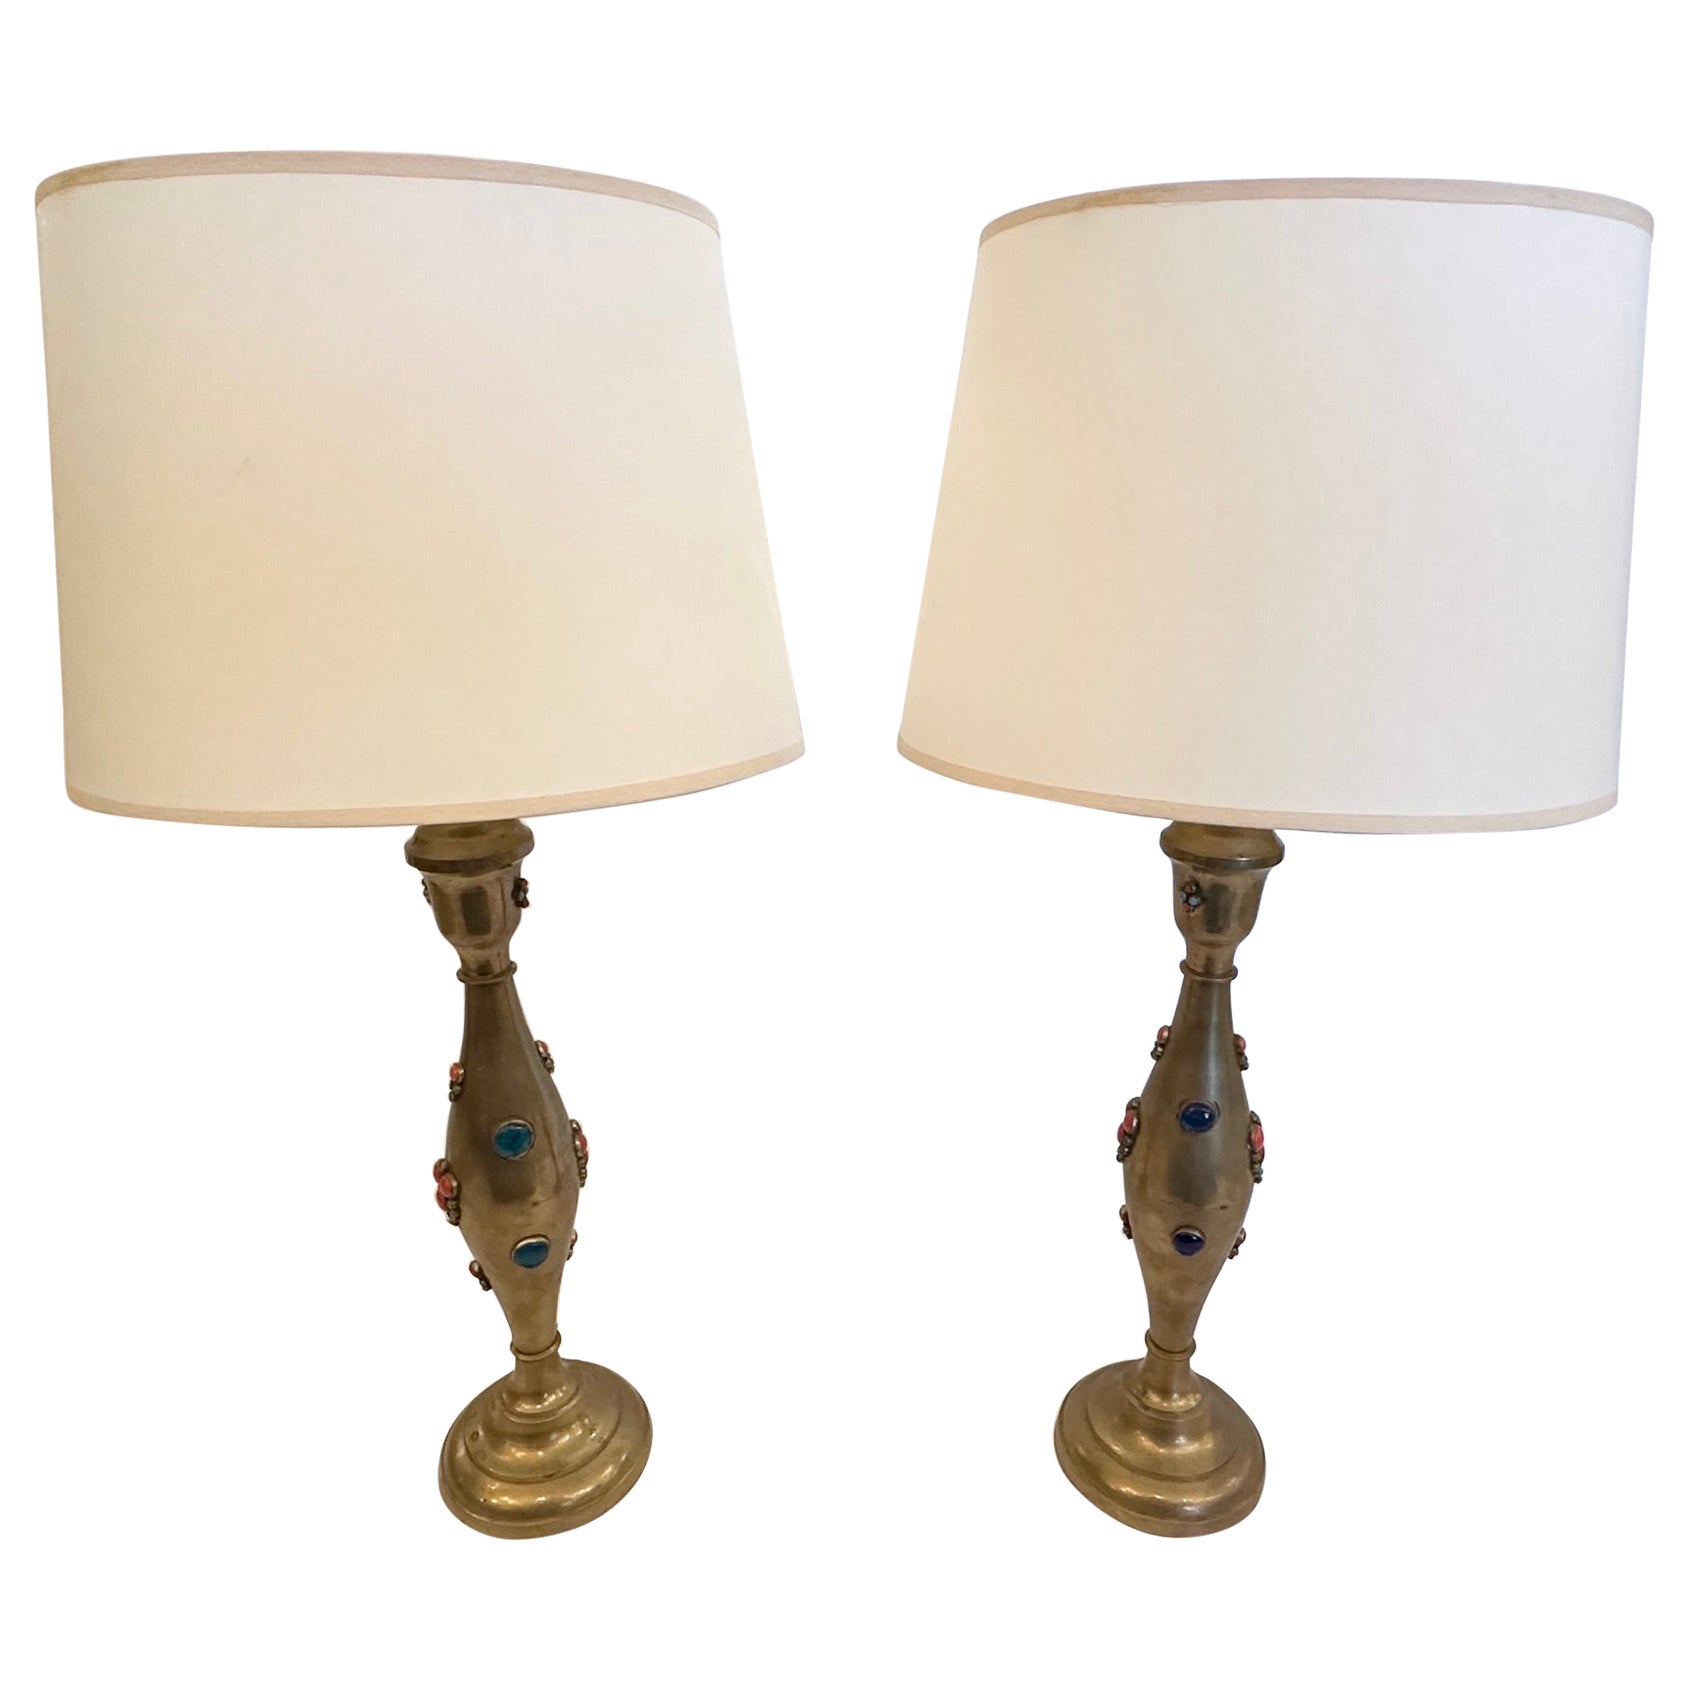 Pair of Jeweled Brass Lamps with Colored Semiprecious Stones